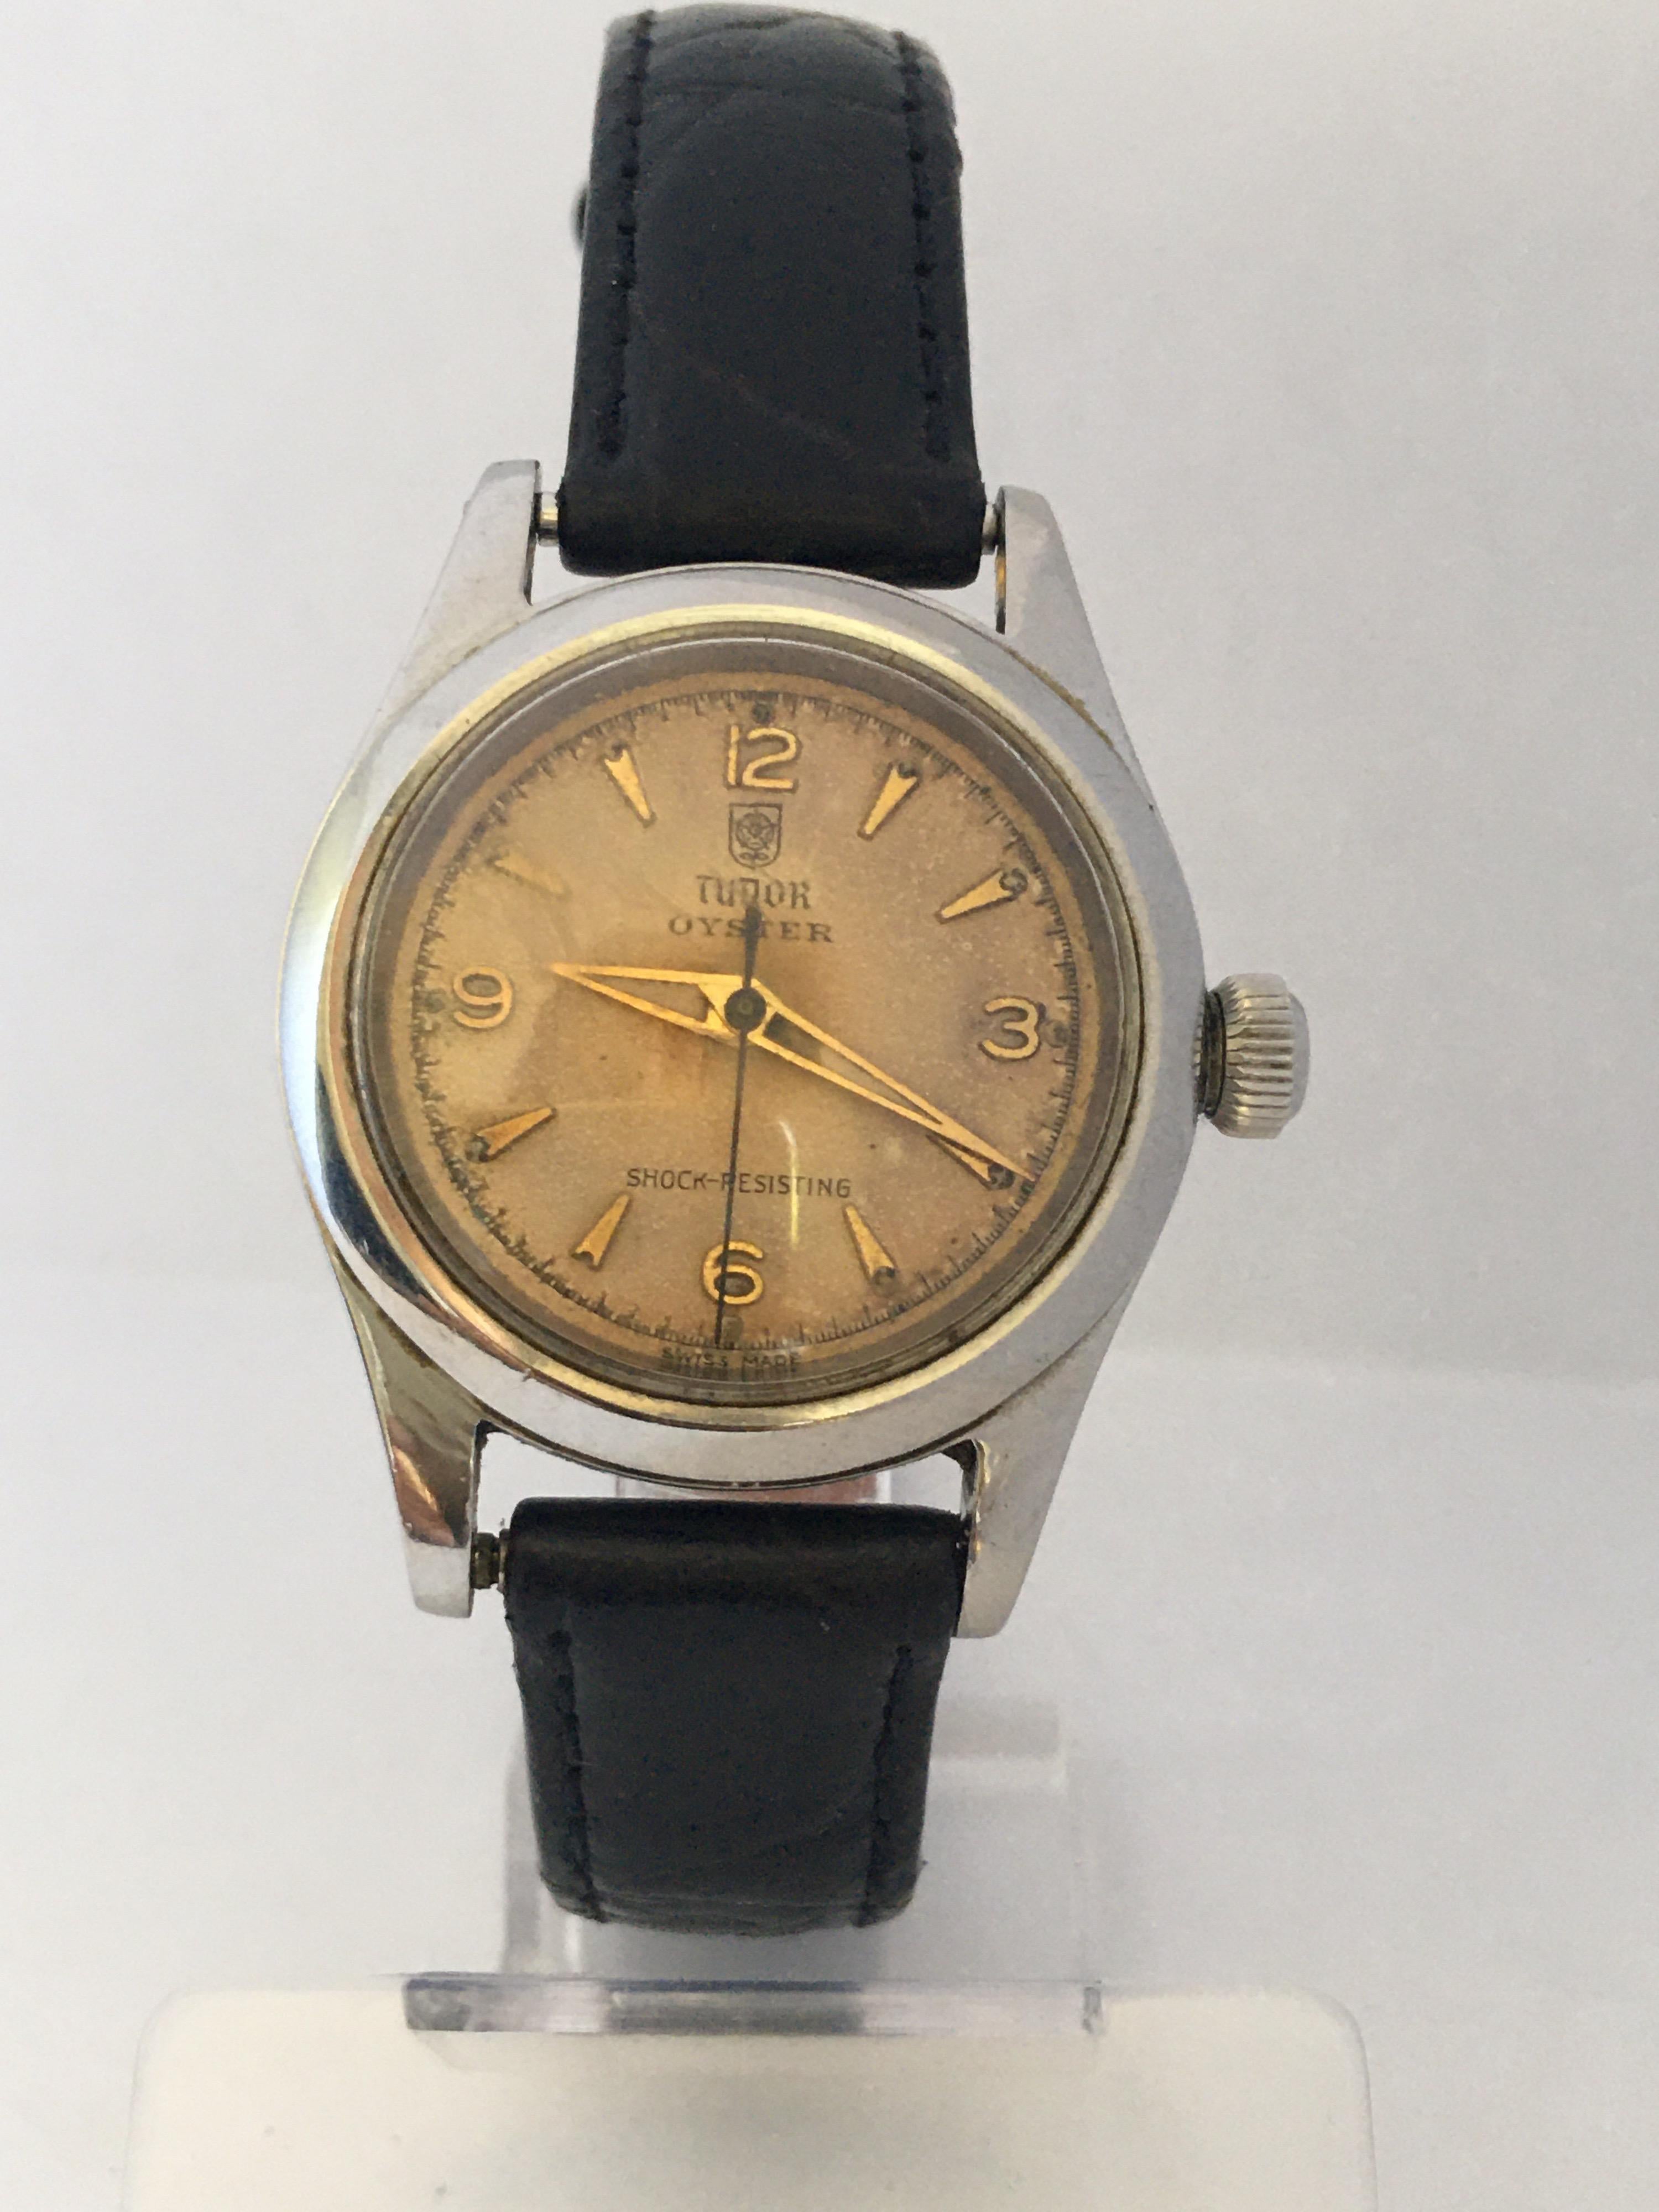 Vintage 1950s Stainless Steel Tudor Oyster Mechanical Watch For Sale 8